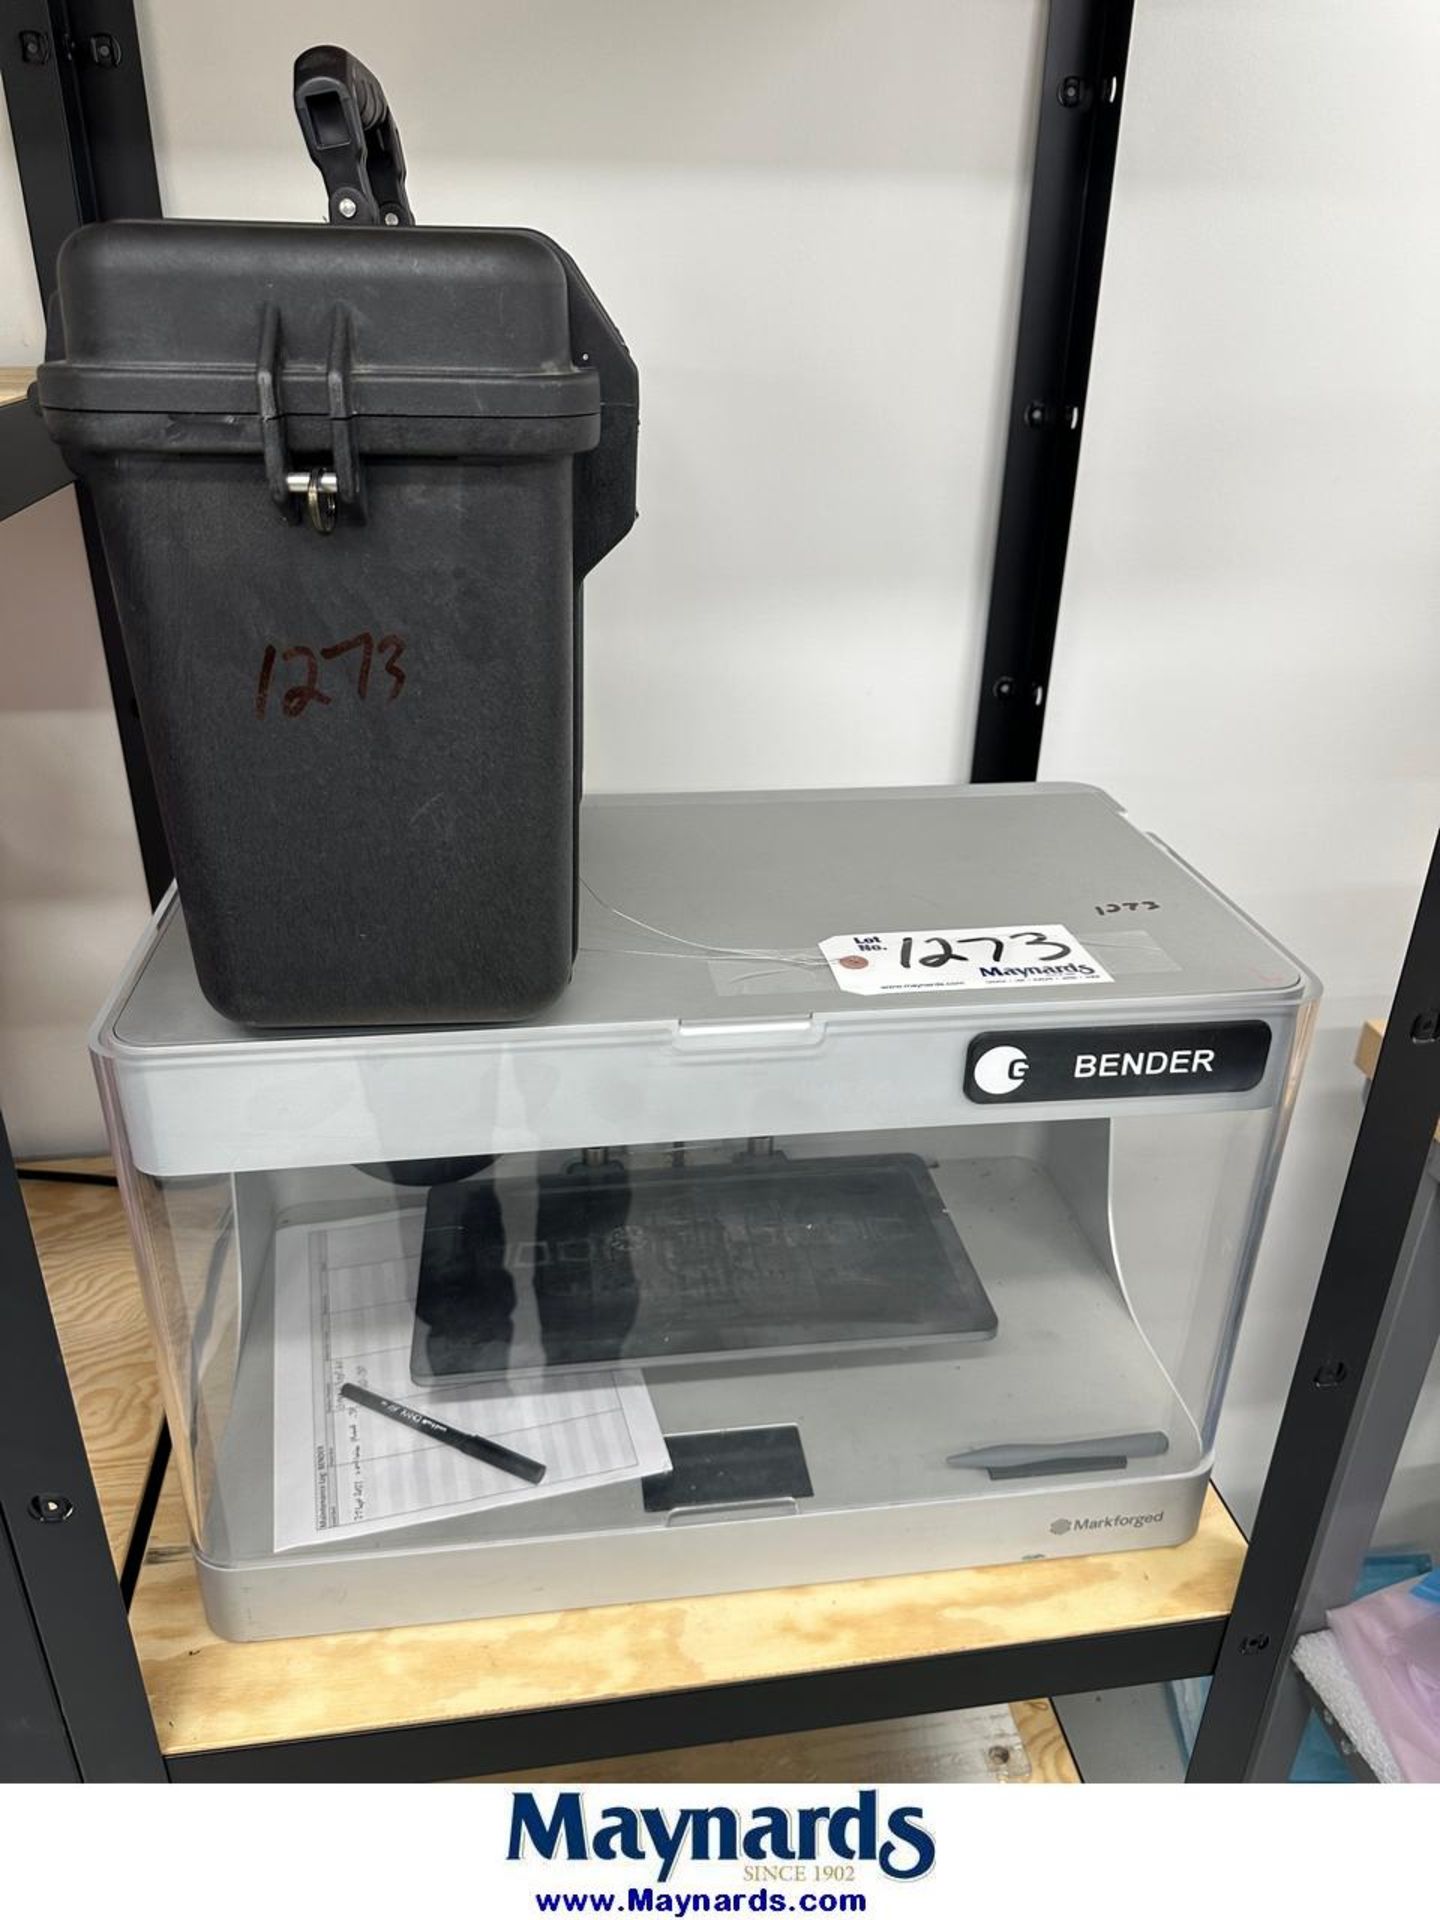 Markforged Mark Two 3D printer